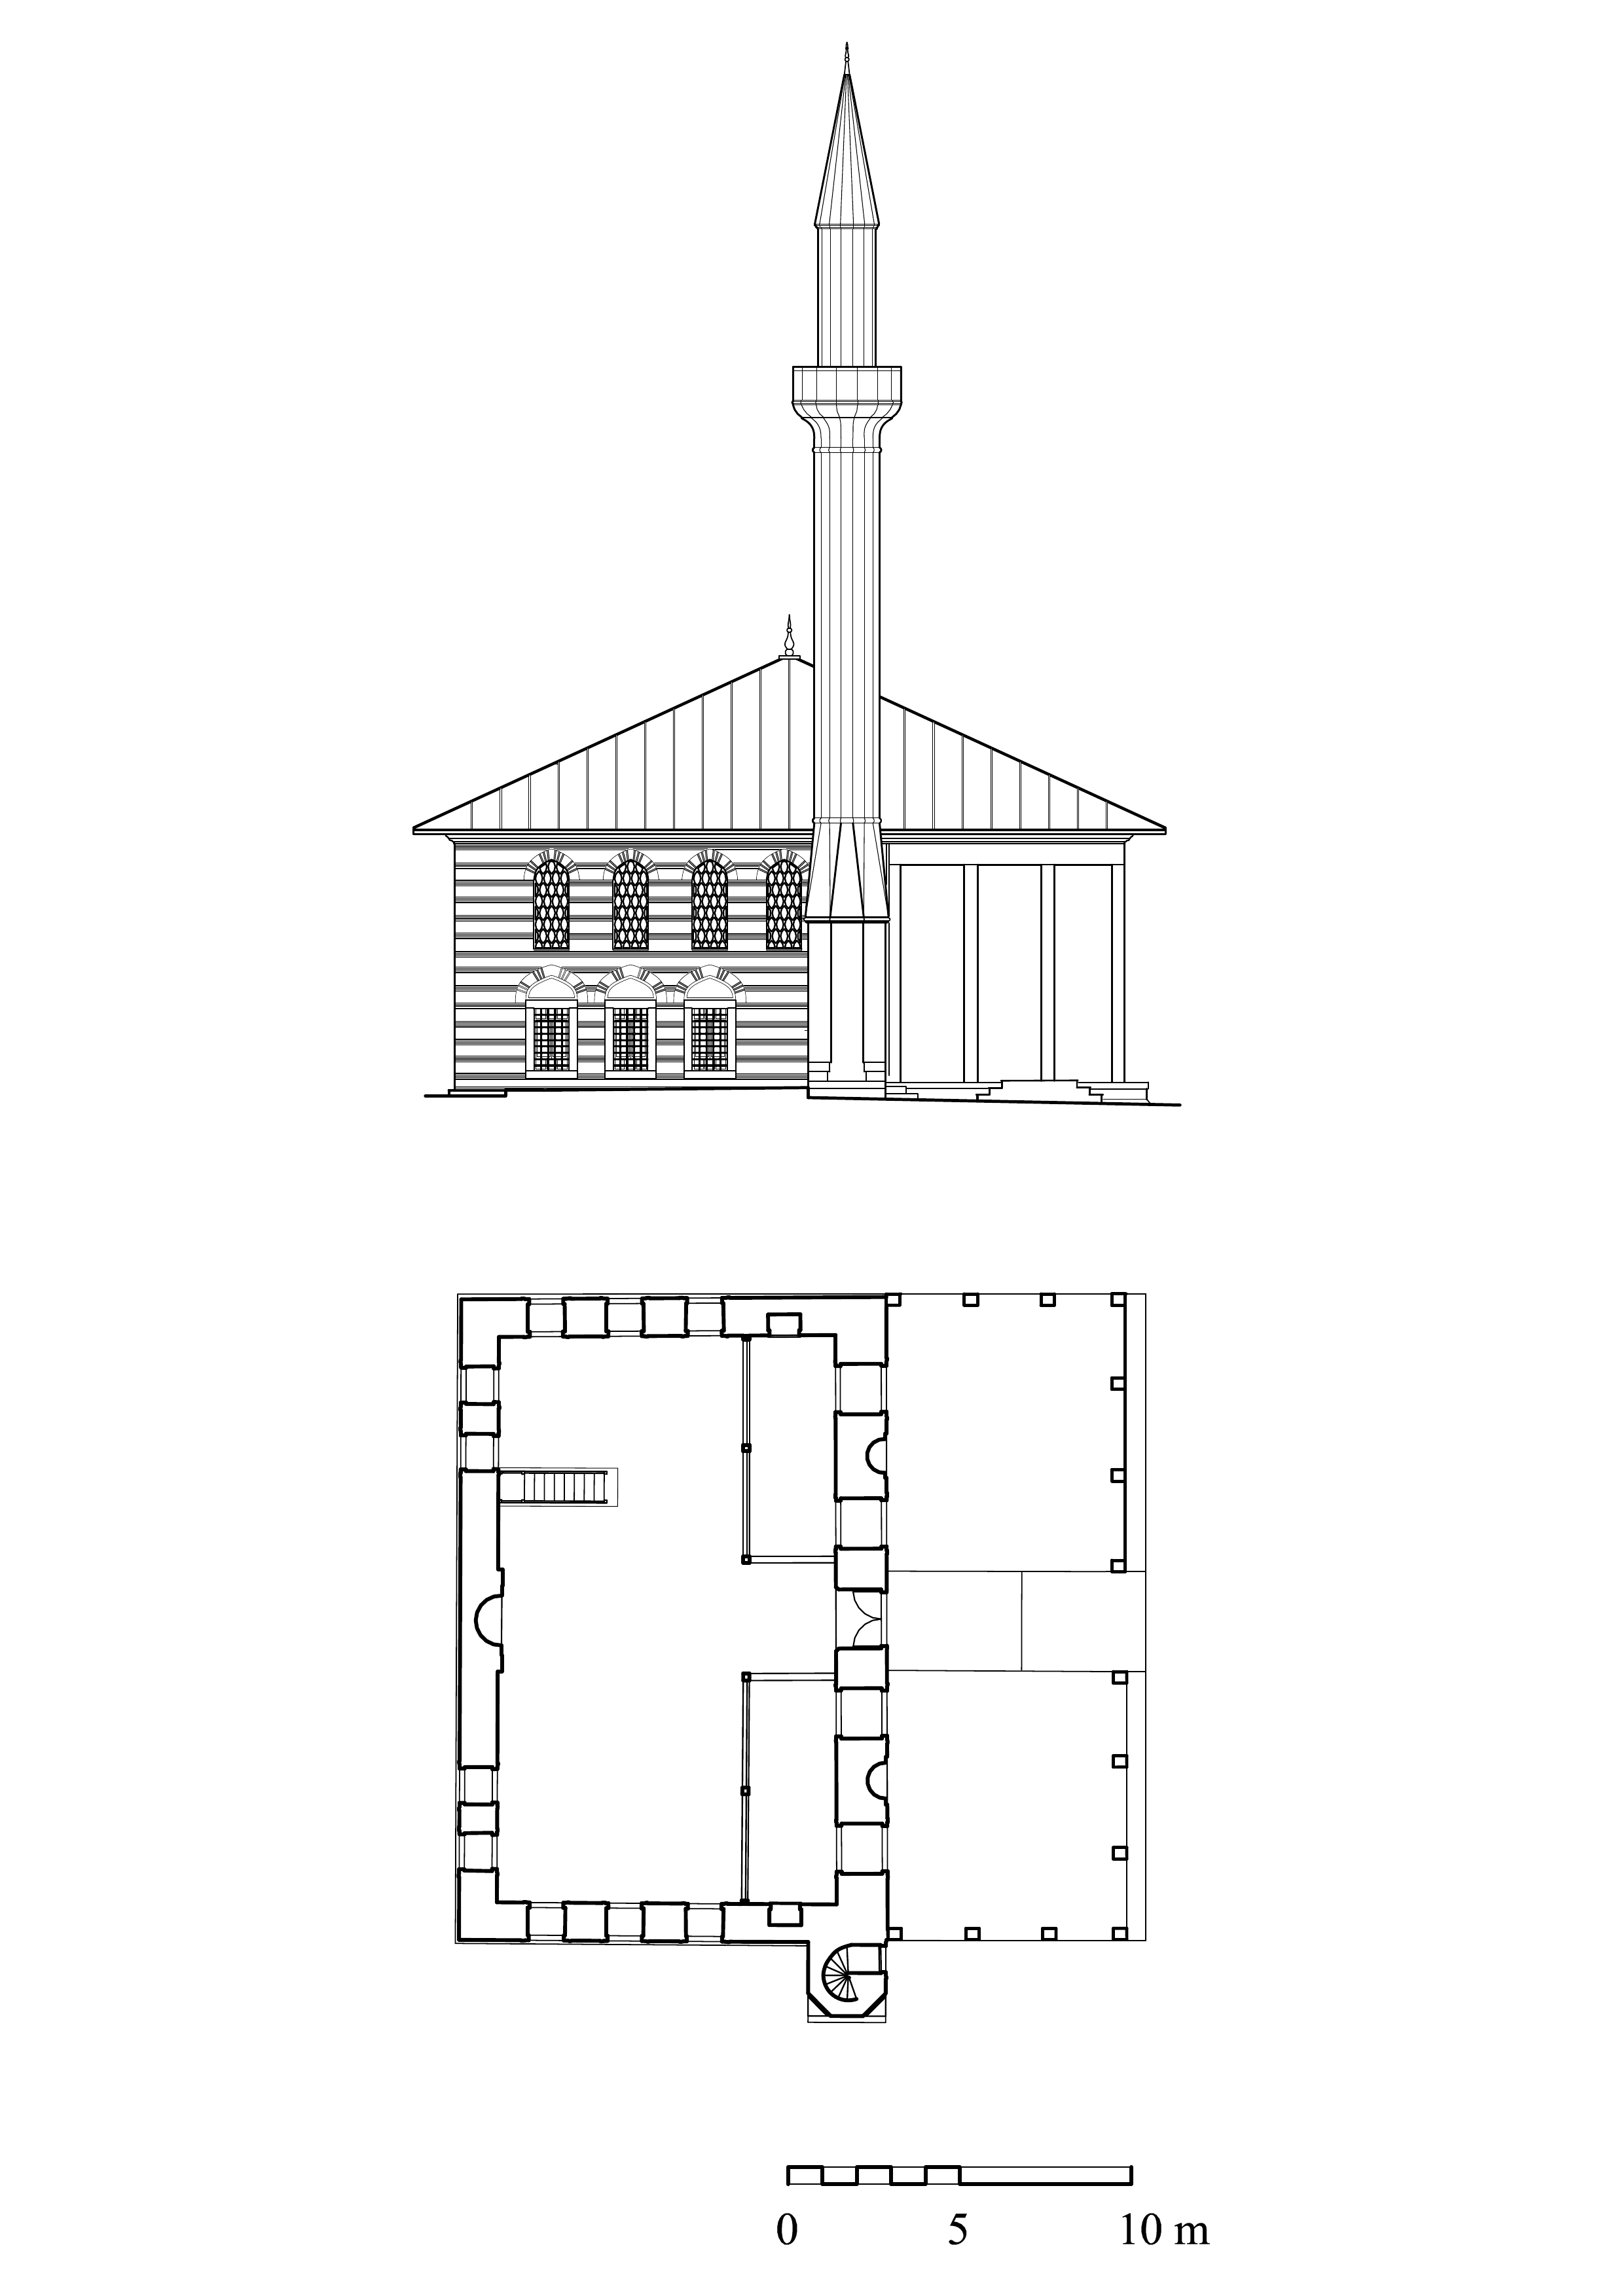 Odabasi Behruz Aga Mosque - Floor plan and elevation with hypothetical reconstruction of portico. DWG file in AutoCAD 2000 format. Click the download button to download a zipped file containing the .dwg file.